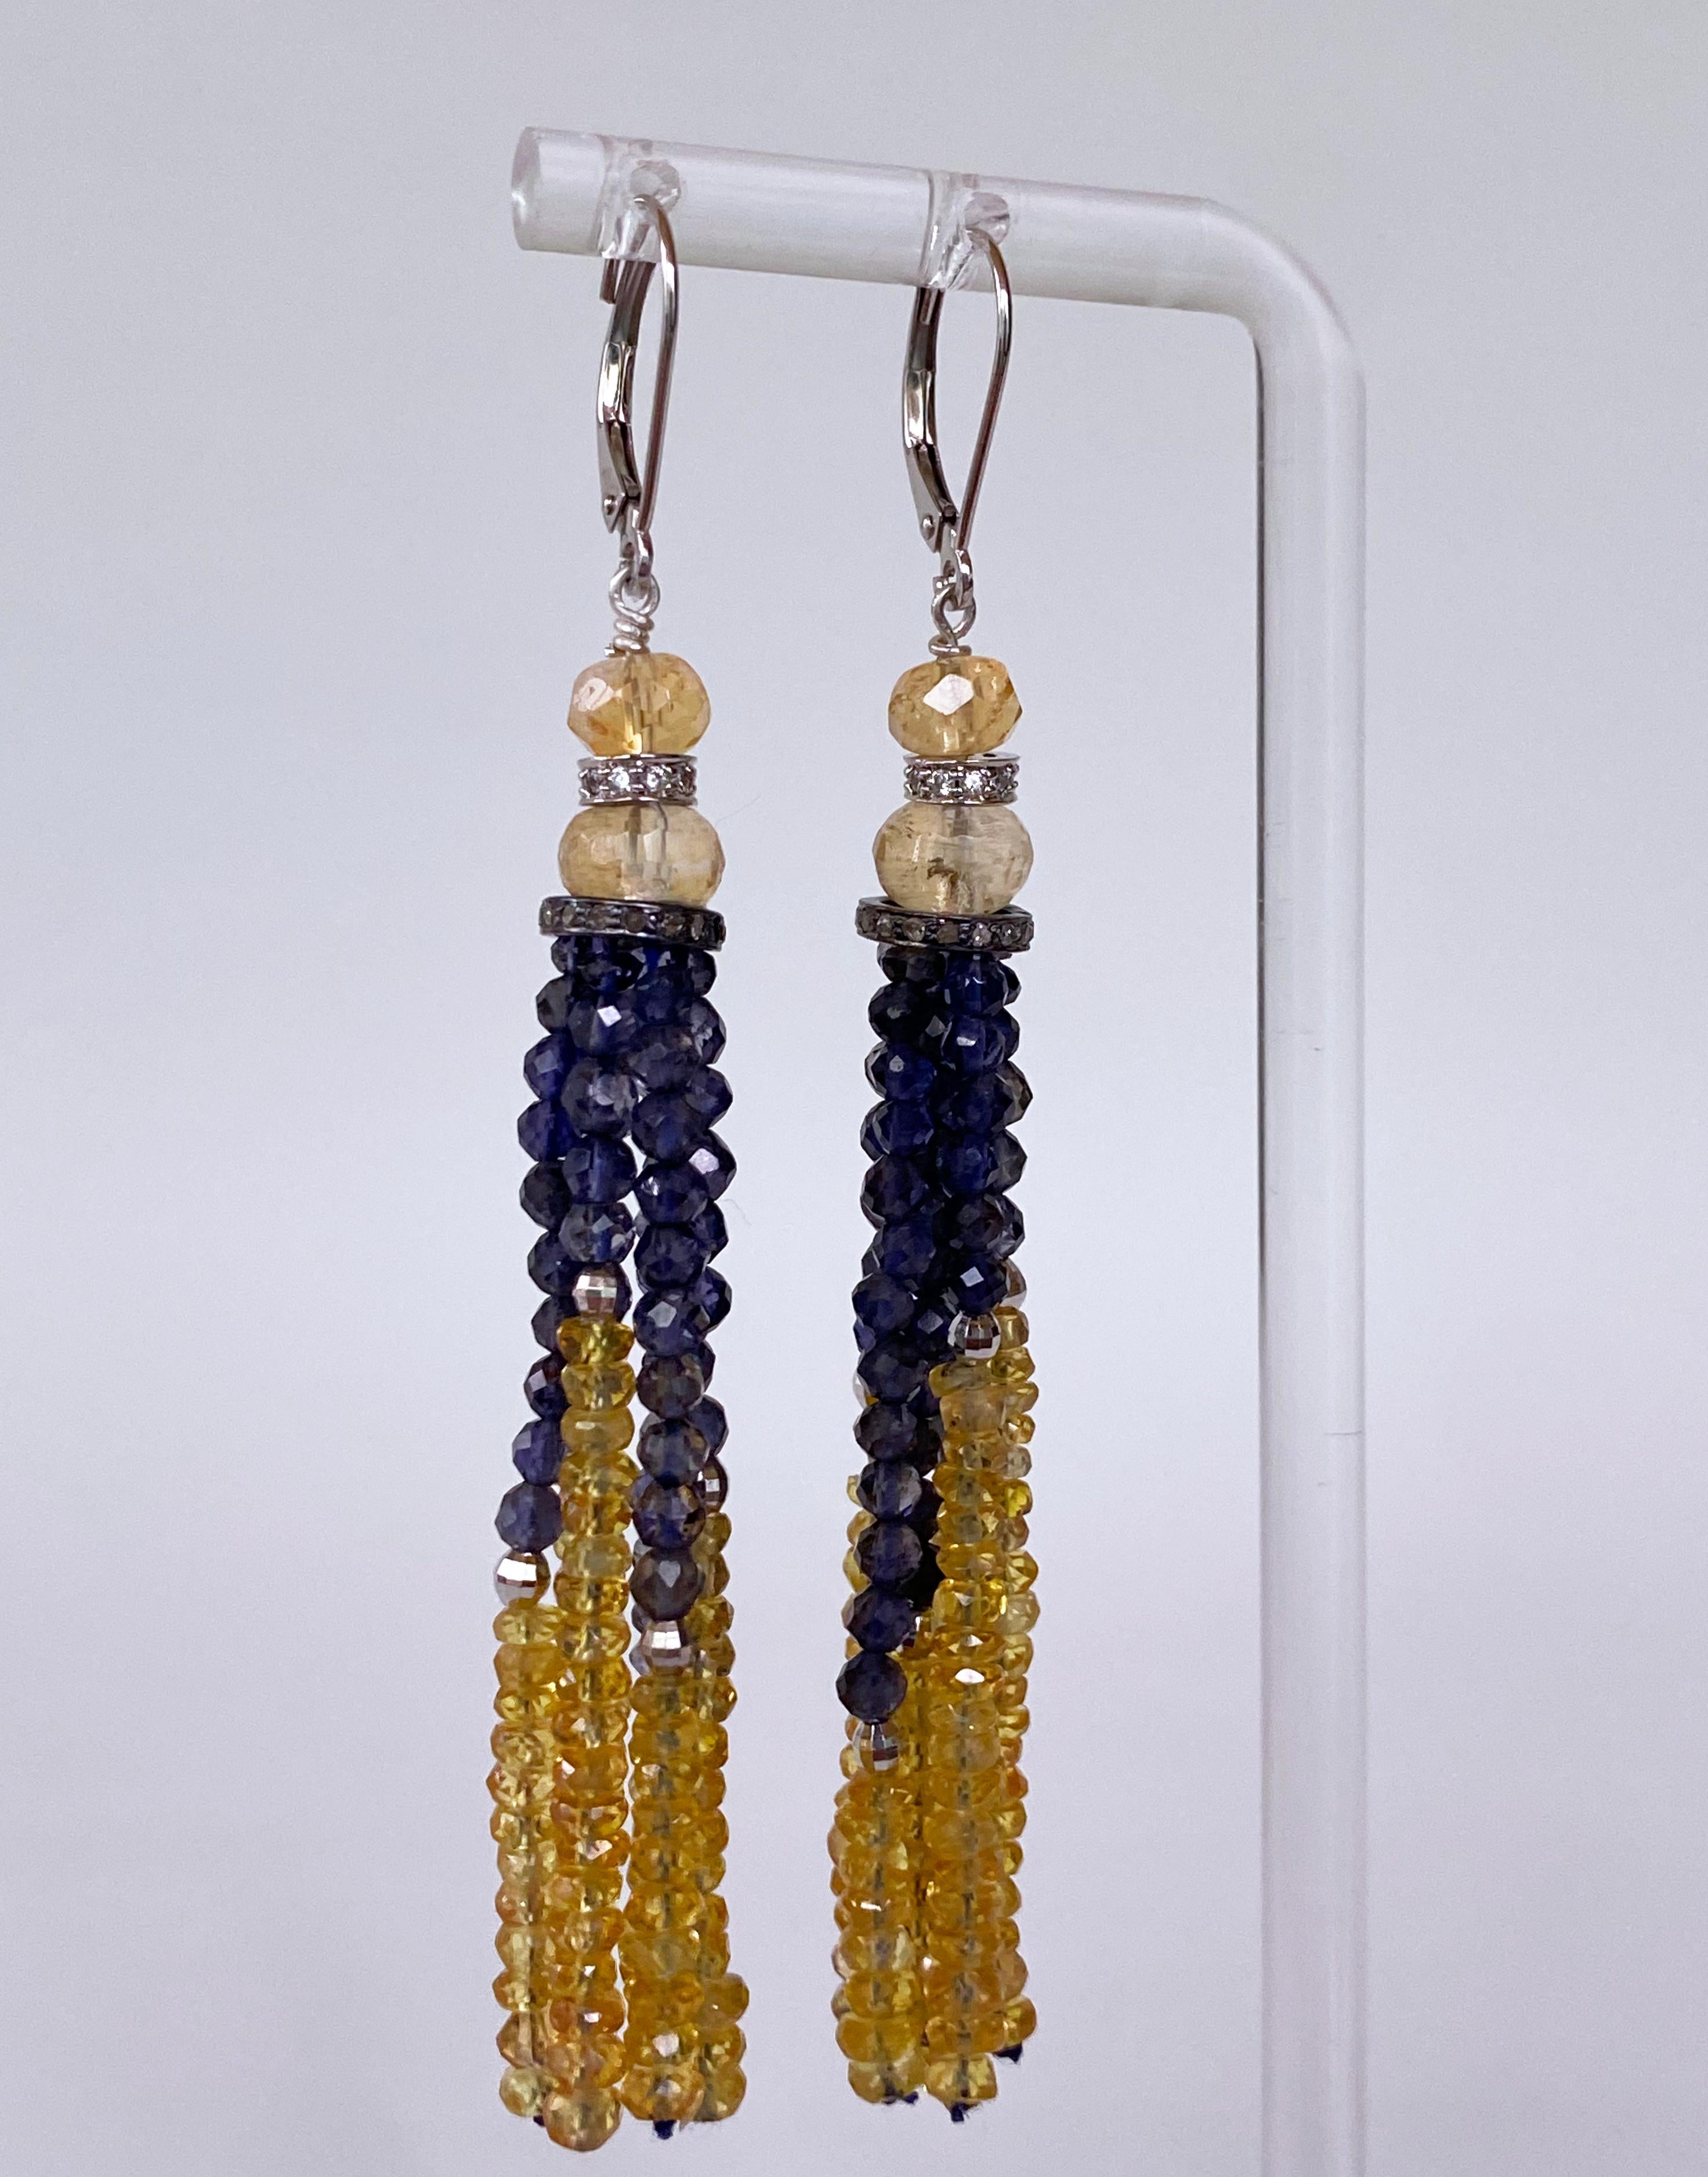 Gorgeous pair of Tassel Earrings by Marina J. This lovely pair features Faceted Citrine and Faceted Iolite. A gorgeous vivid Golden Citrine sits atop a Cushion cut Diamond encrusted solid 14k White Gold roundel which sits above a larger Faceted